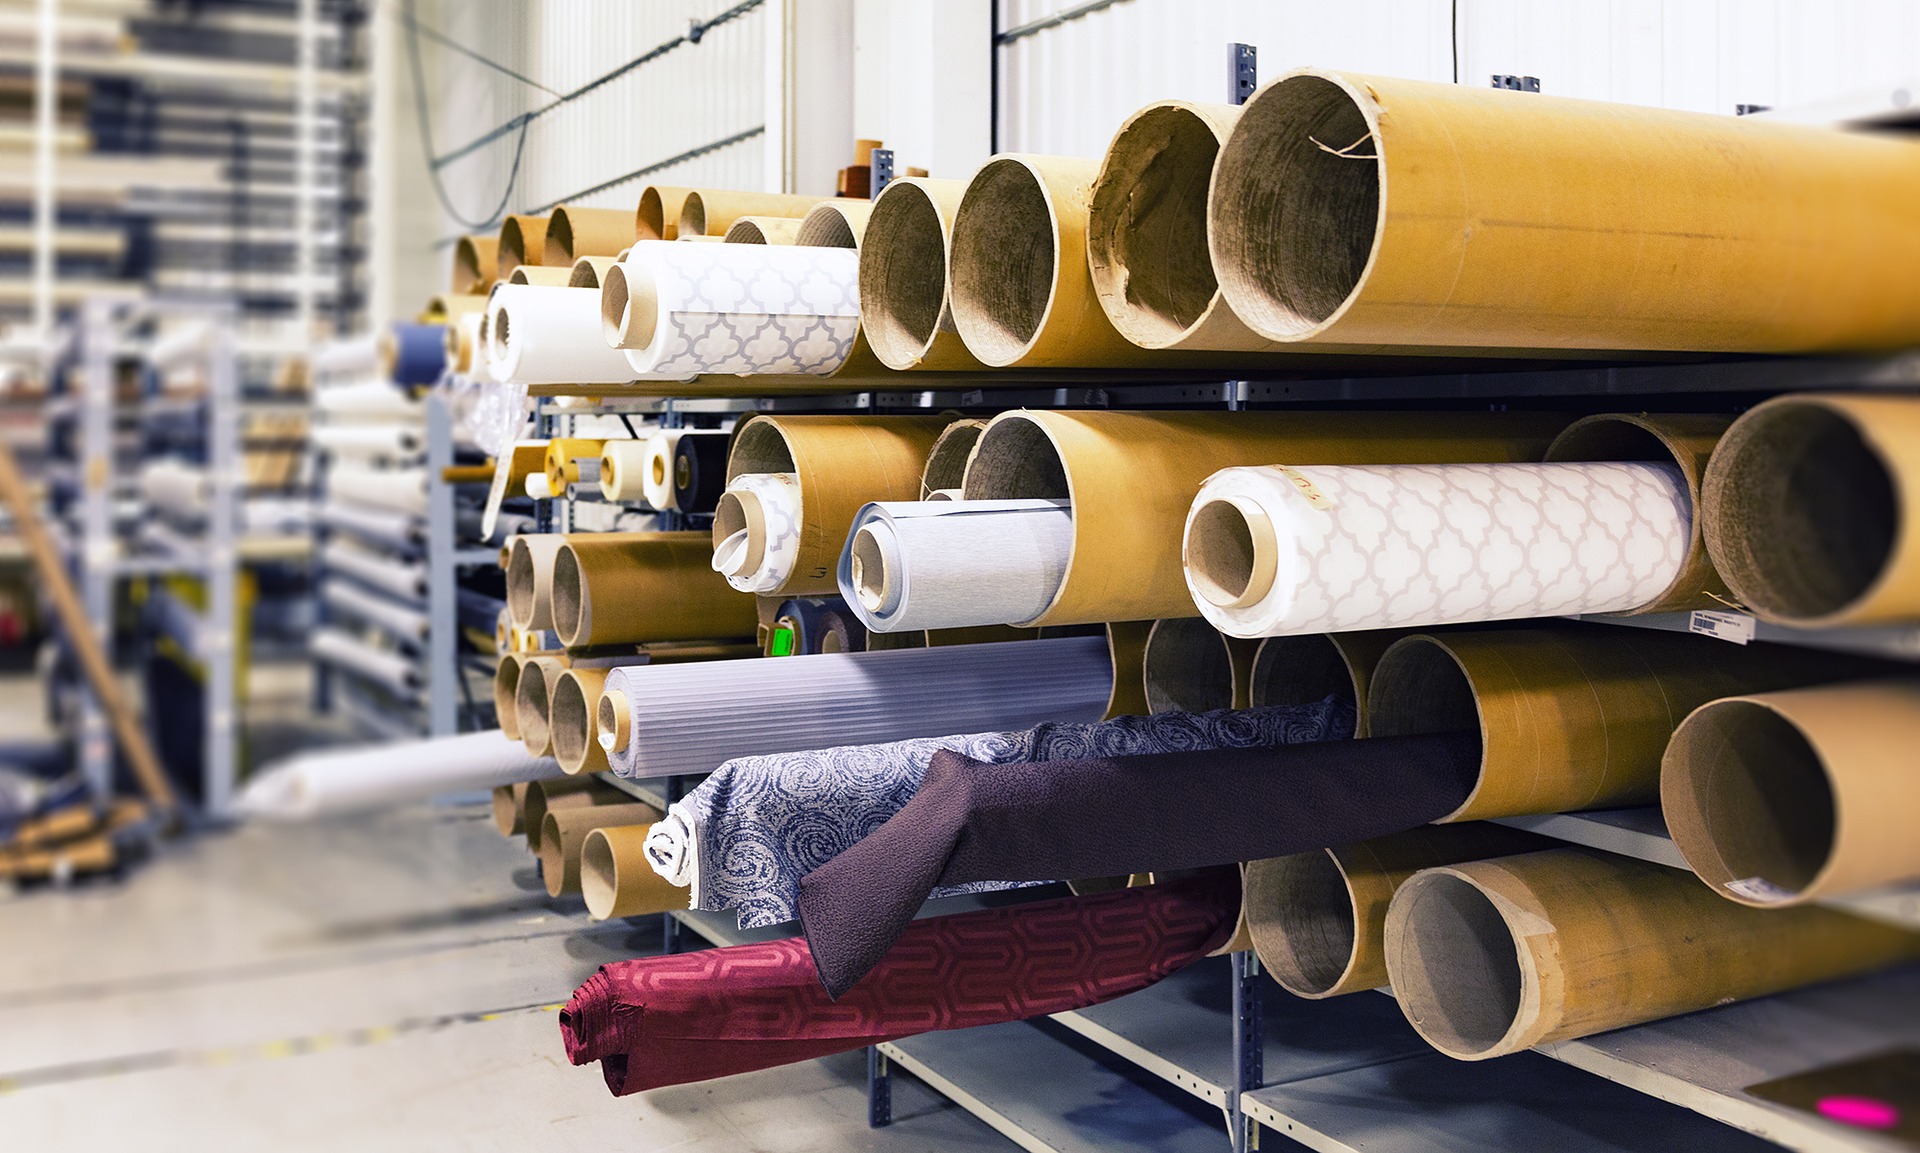 Rolls of fabric on a storage cart in a factory.